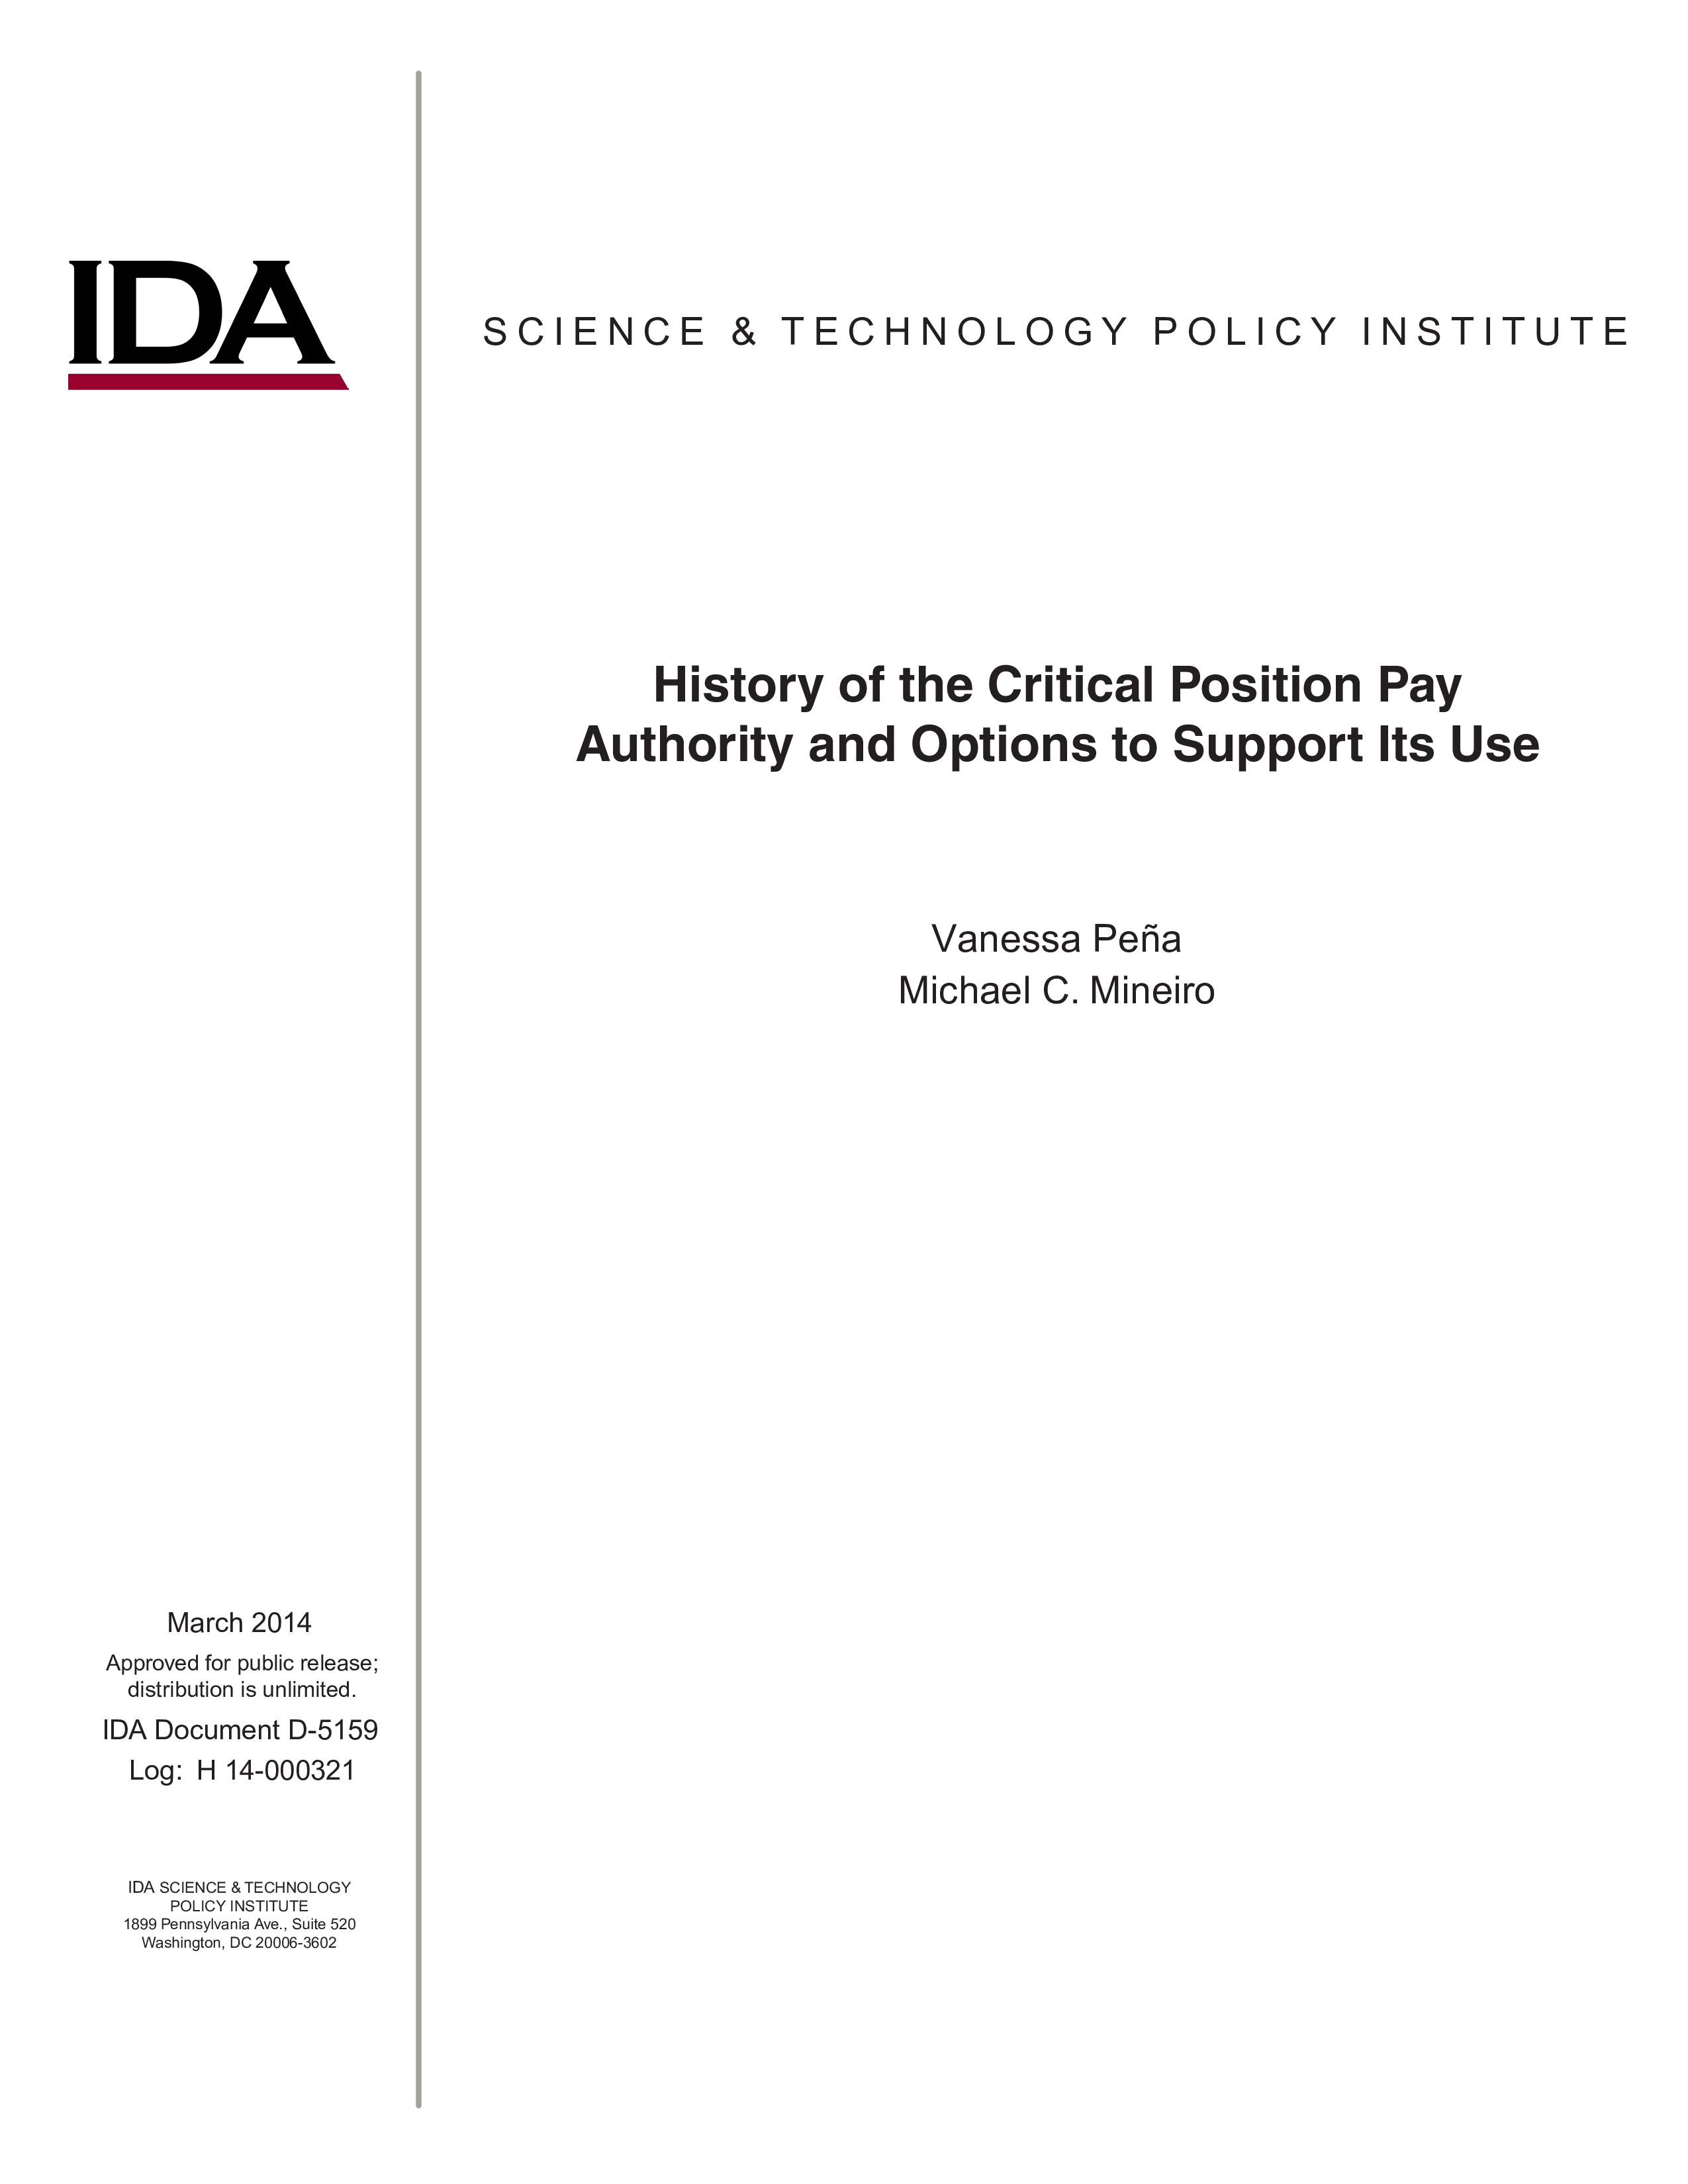 History of the Critical Position Pay Authority and Options to Support Its Use